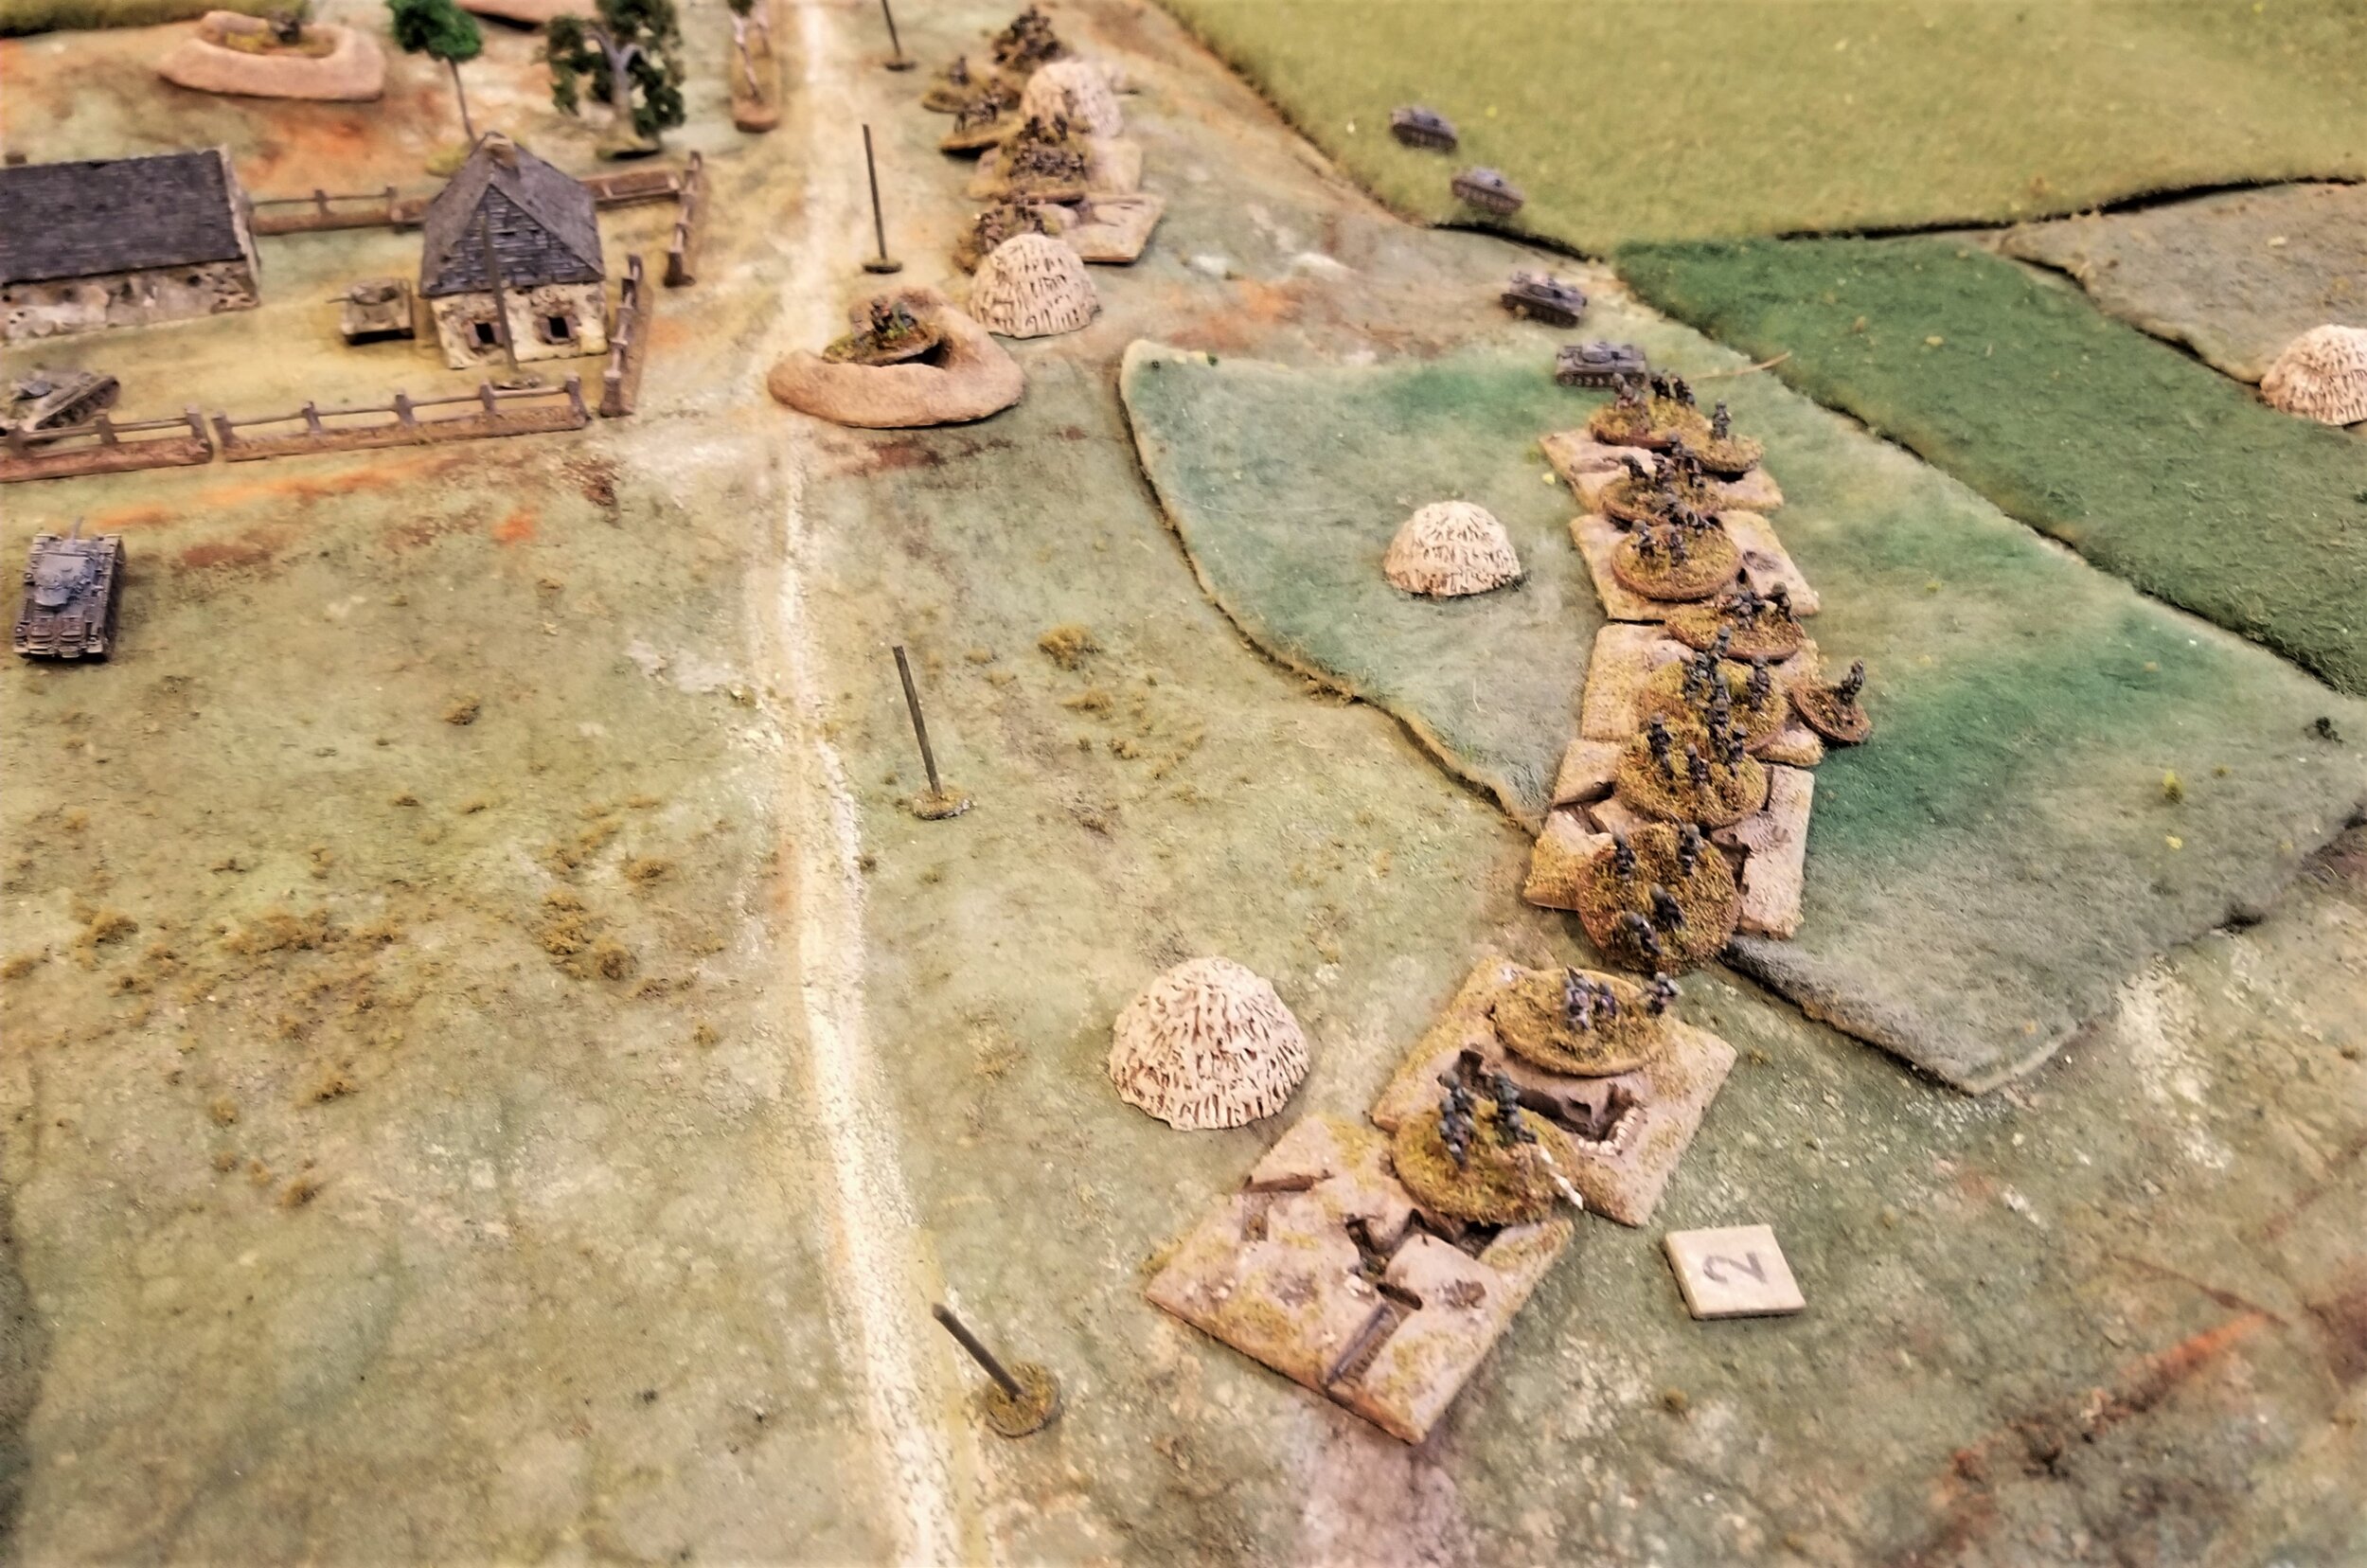 Germans in the trenches